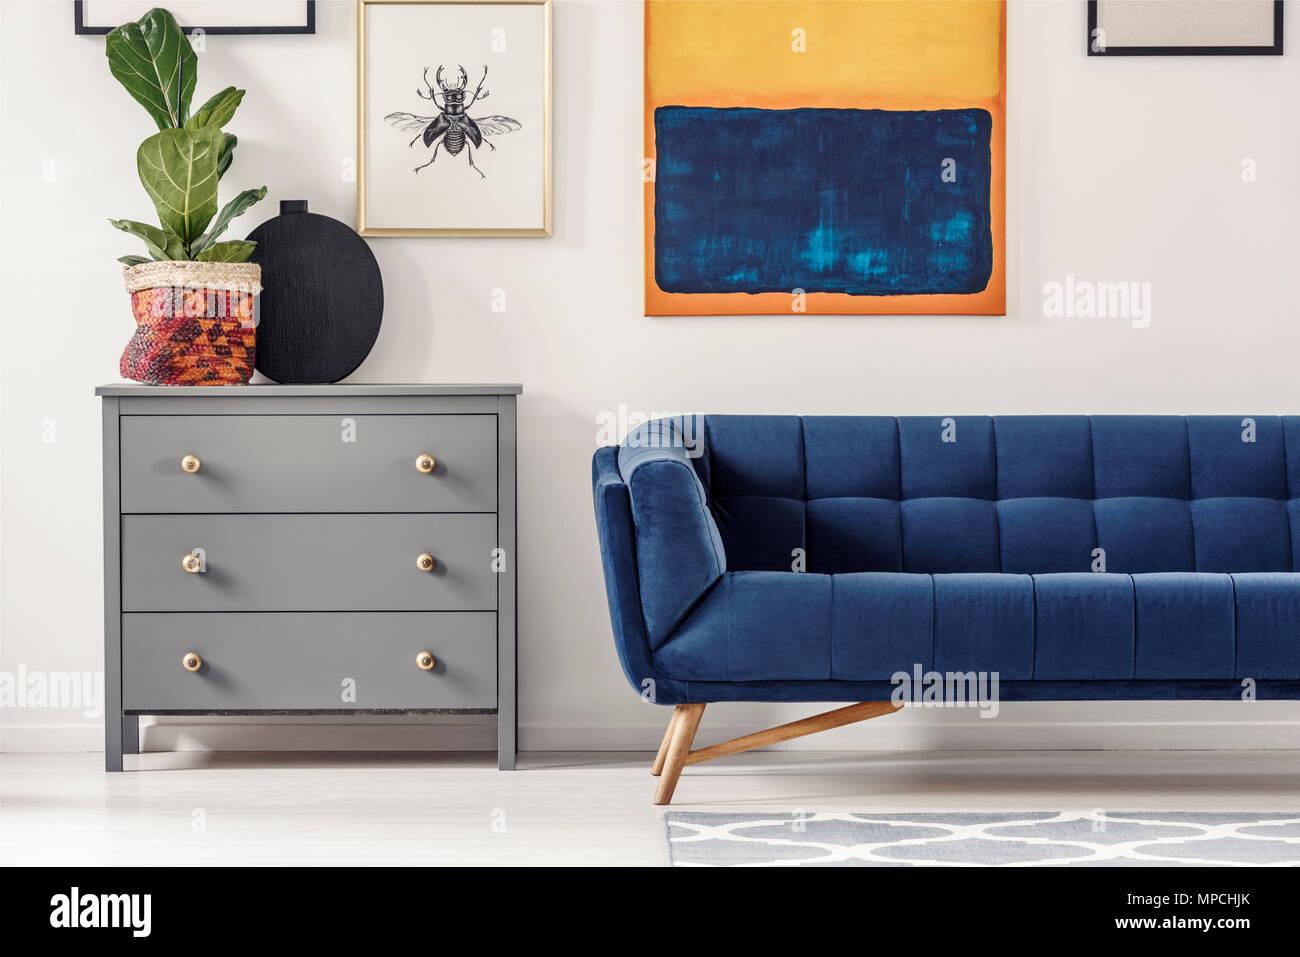 Fresh green plant placed on grey cupboard standing next to navy blue sofa in bright living room interior with fly poster and modern art painting Stock Photo